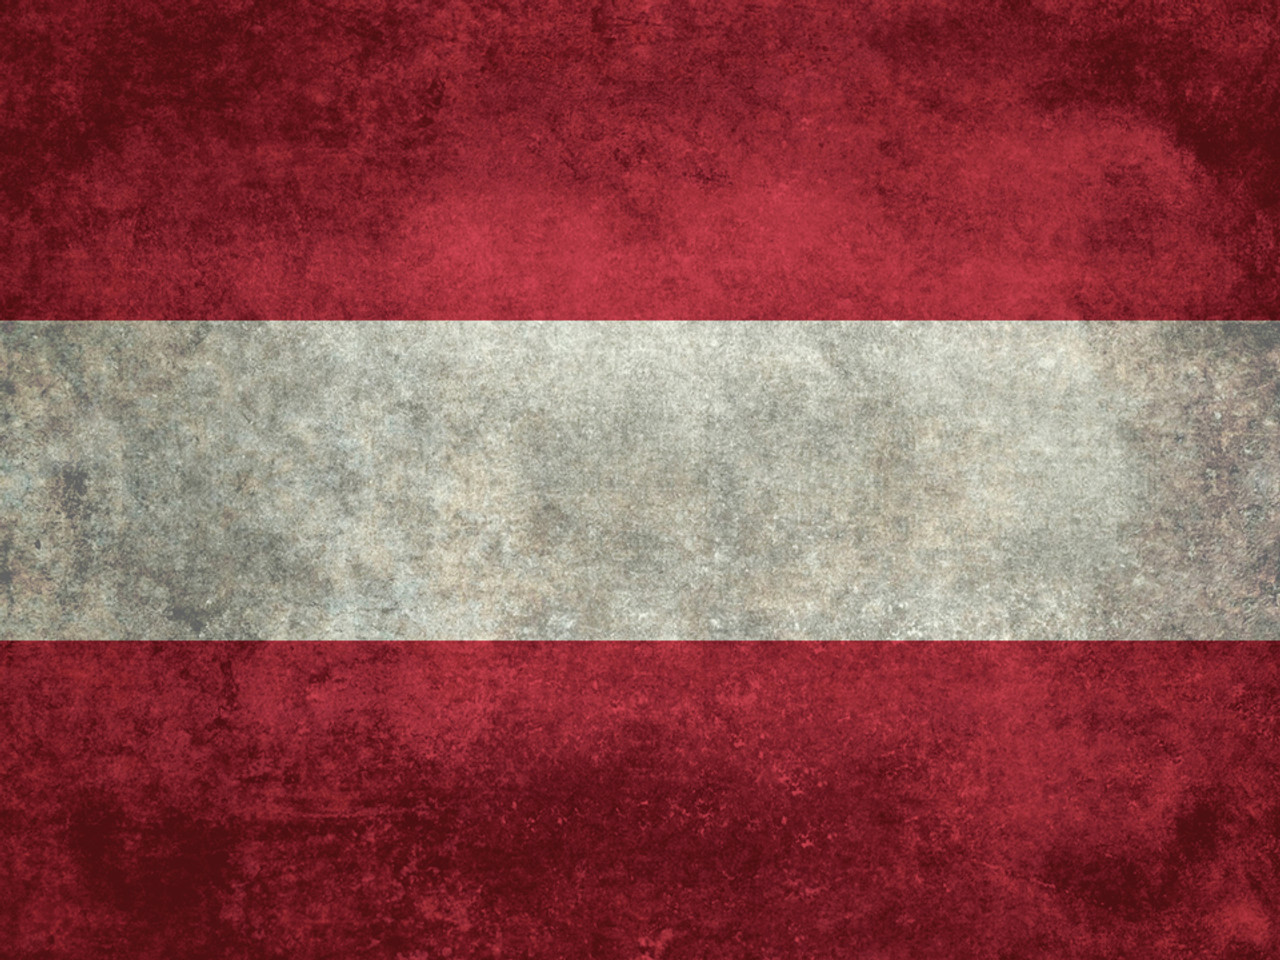 Austrian National Flag - Vintage Version - Made and Curated